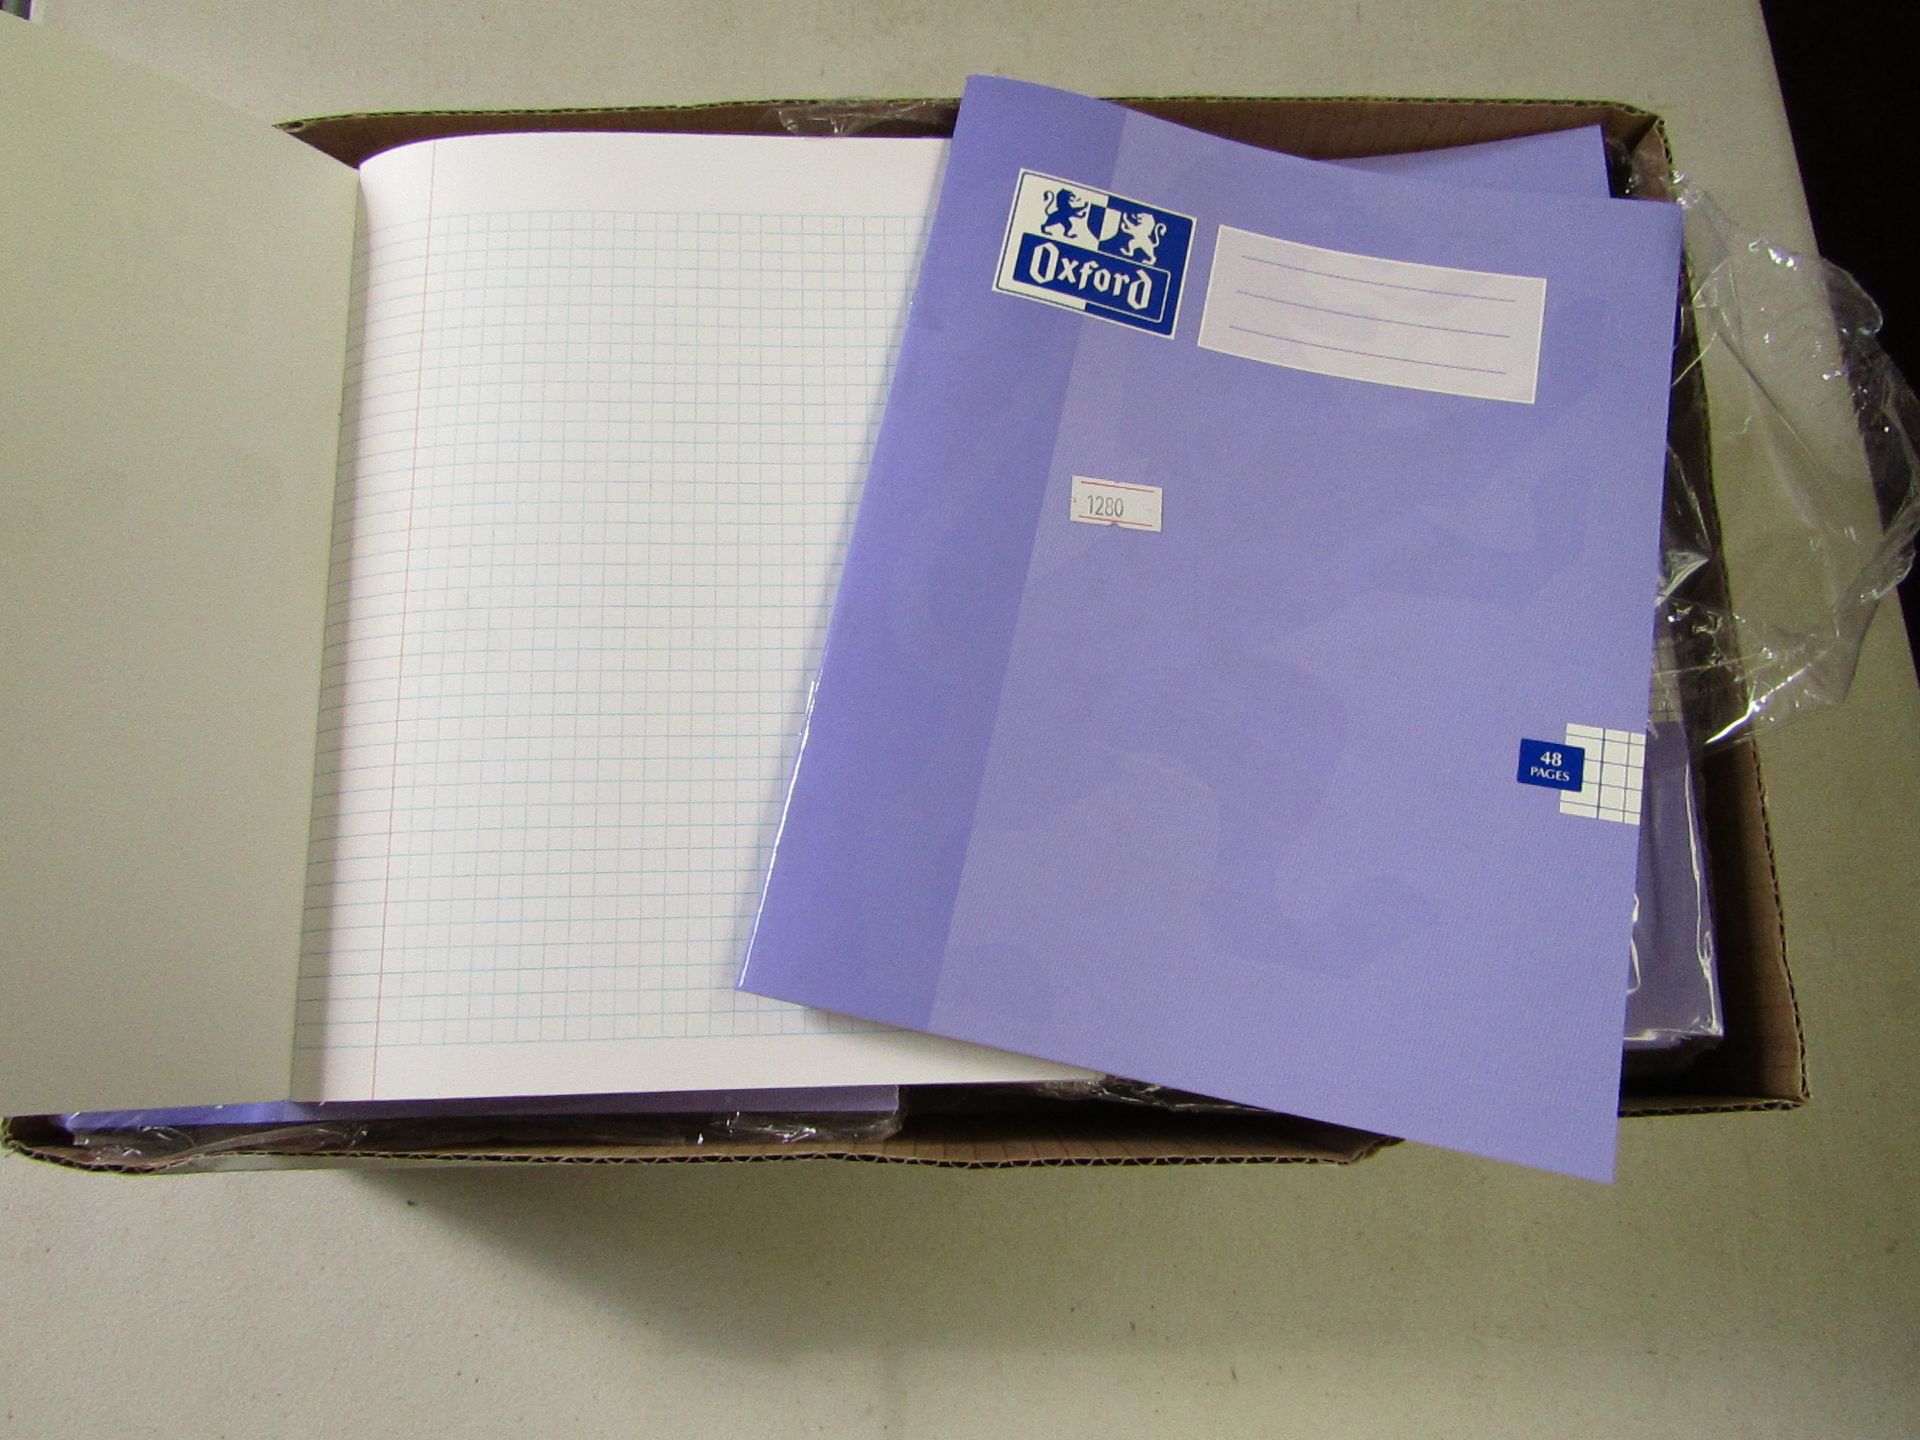 Box of 50x Oxford notebooks (48page), 5mm purple colour . New. RRP £13.99       SKU code-147659